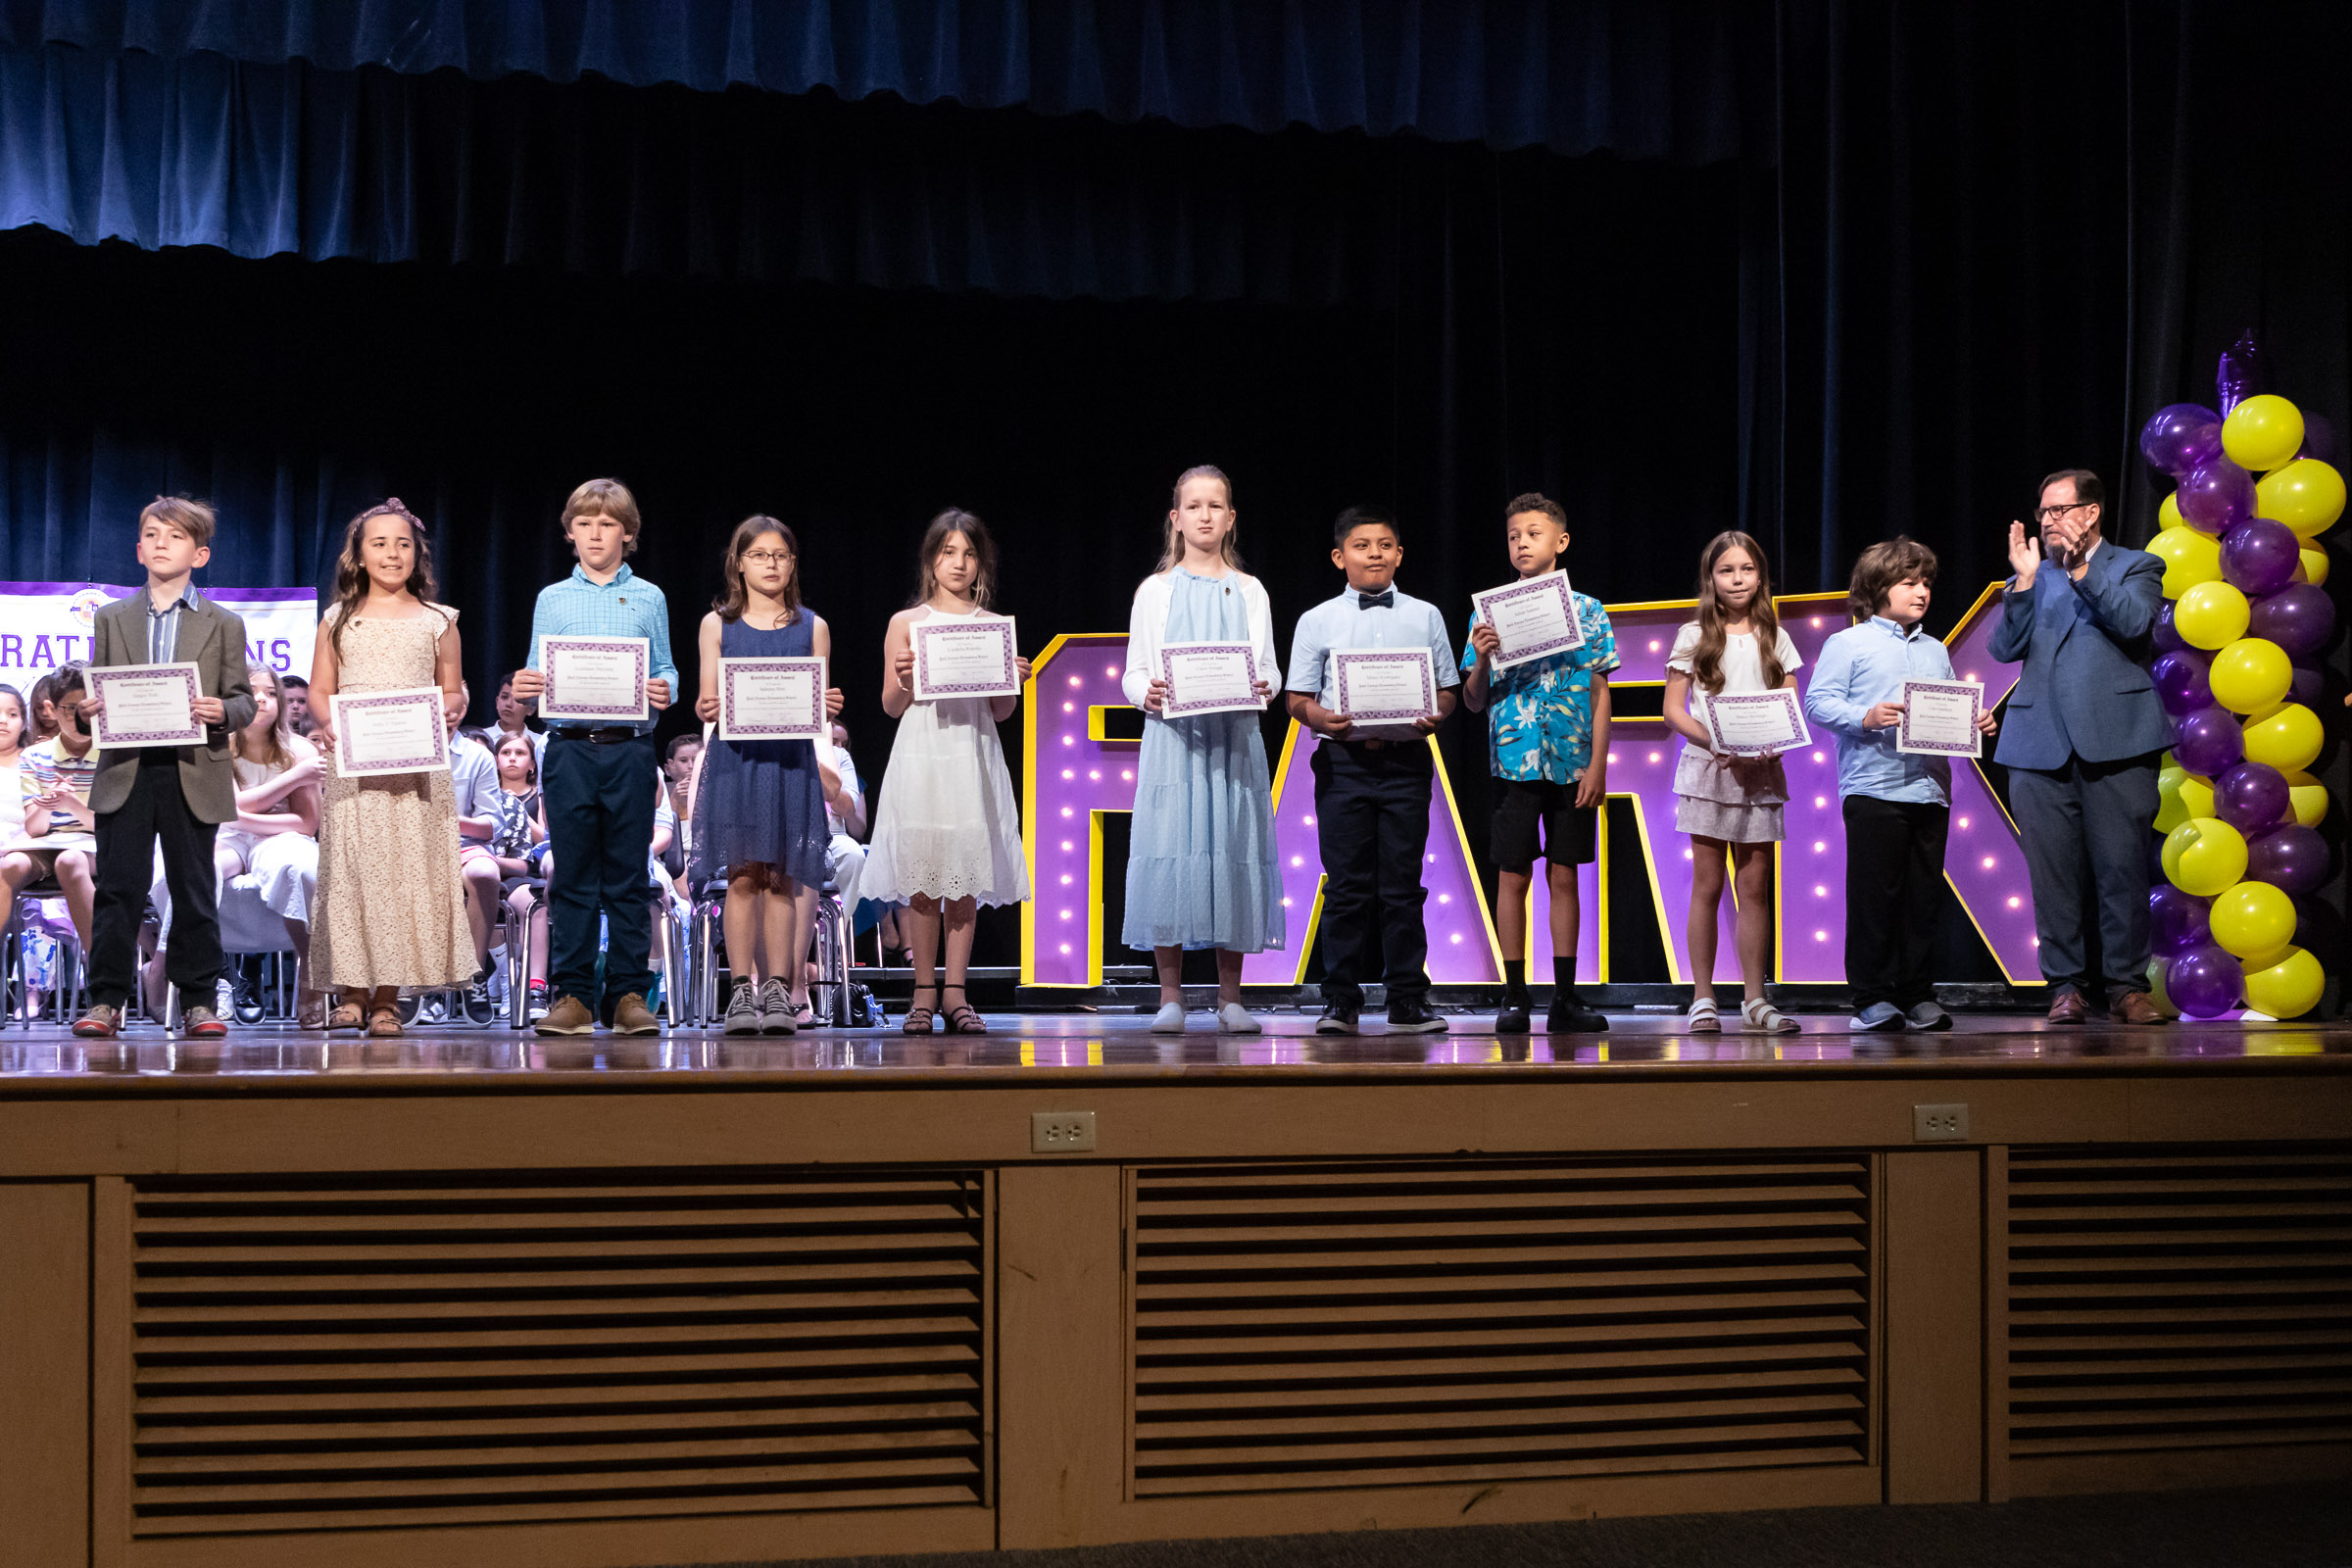 Students stand with their awards on stage during the Park Avenue Elementary School Fourth Grade Moving Up Ceremony in the WVHS auditorium